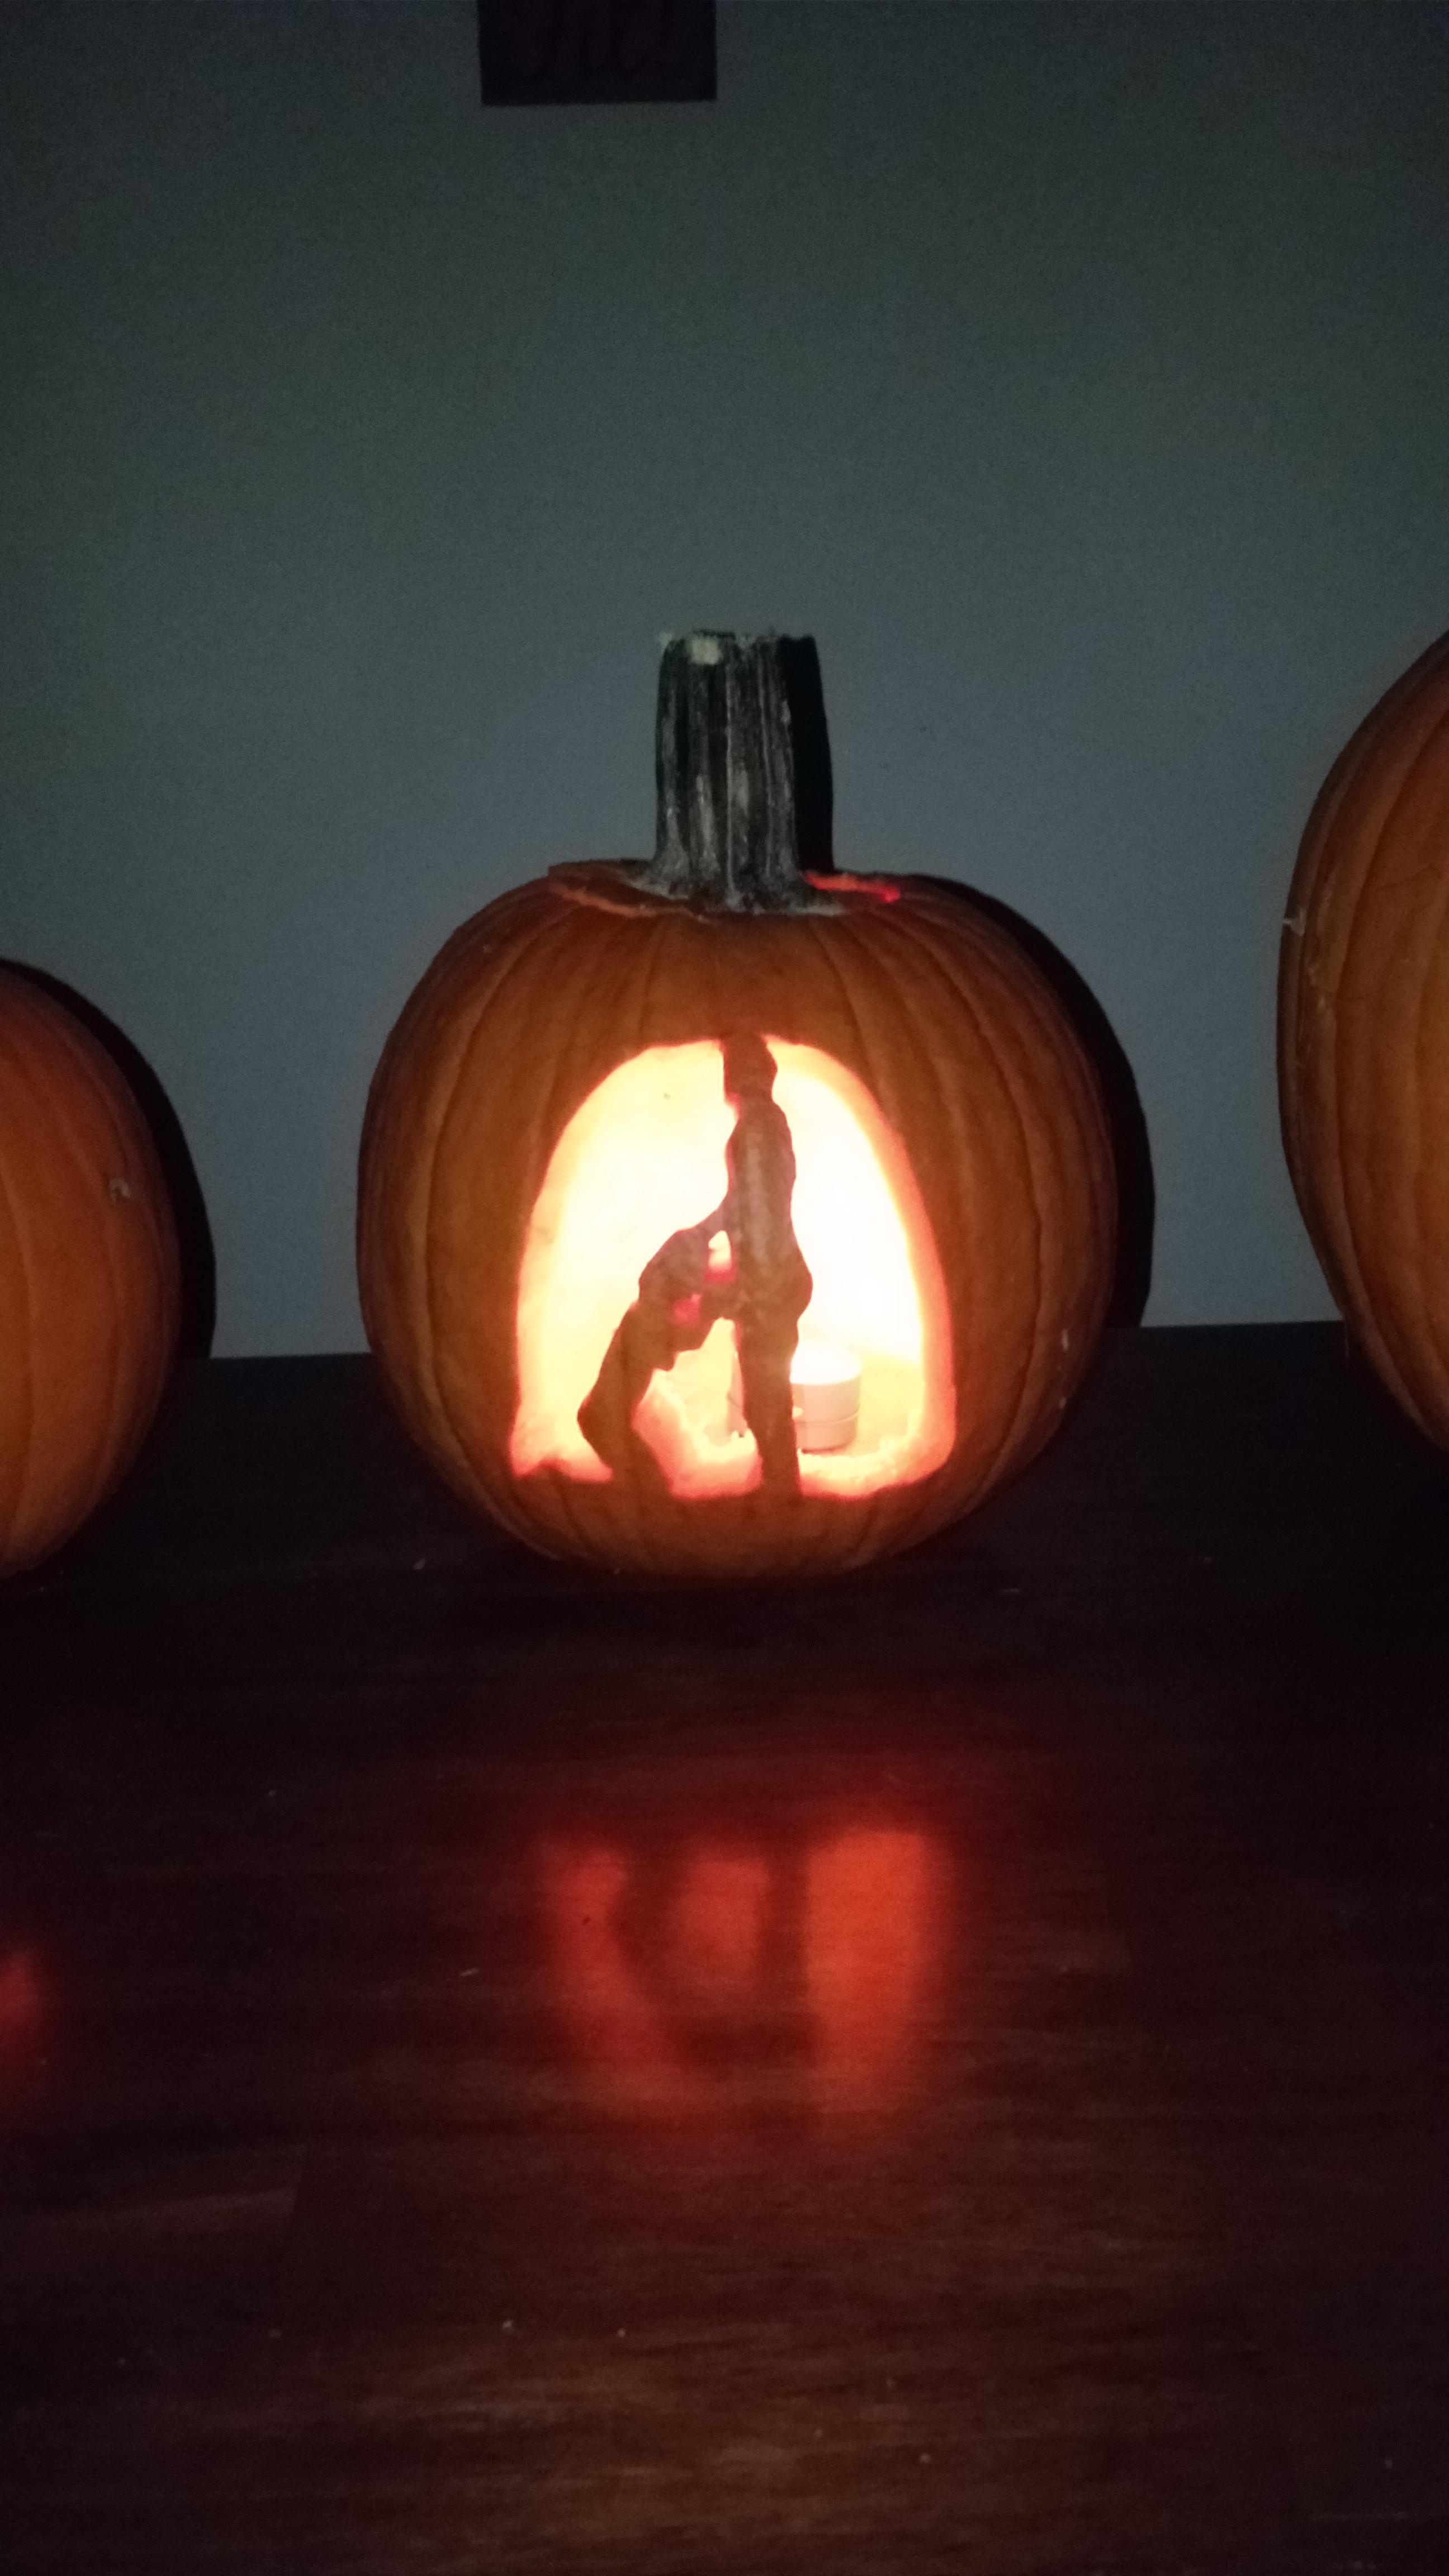 My Girlfriend Won’t Let Me Put My Pumpkin On The Porch This Year So I’m Putting It On Reddit.